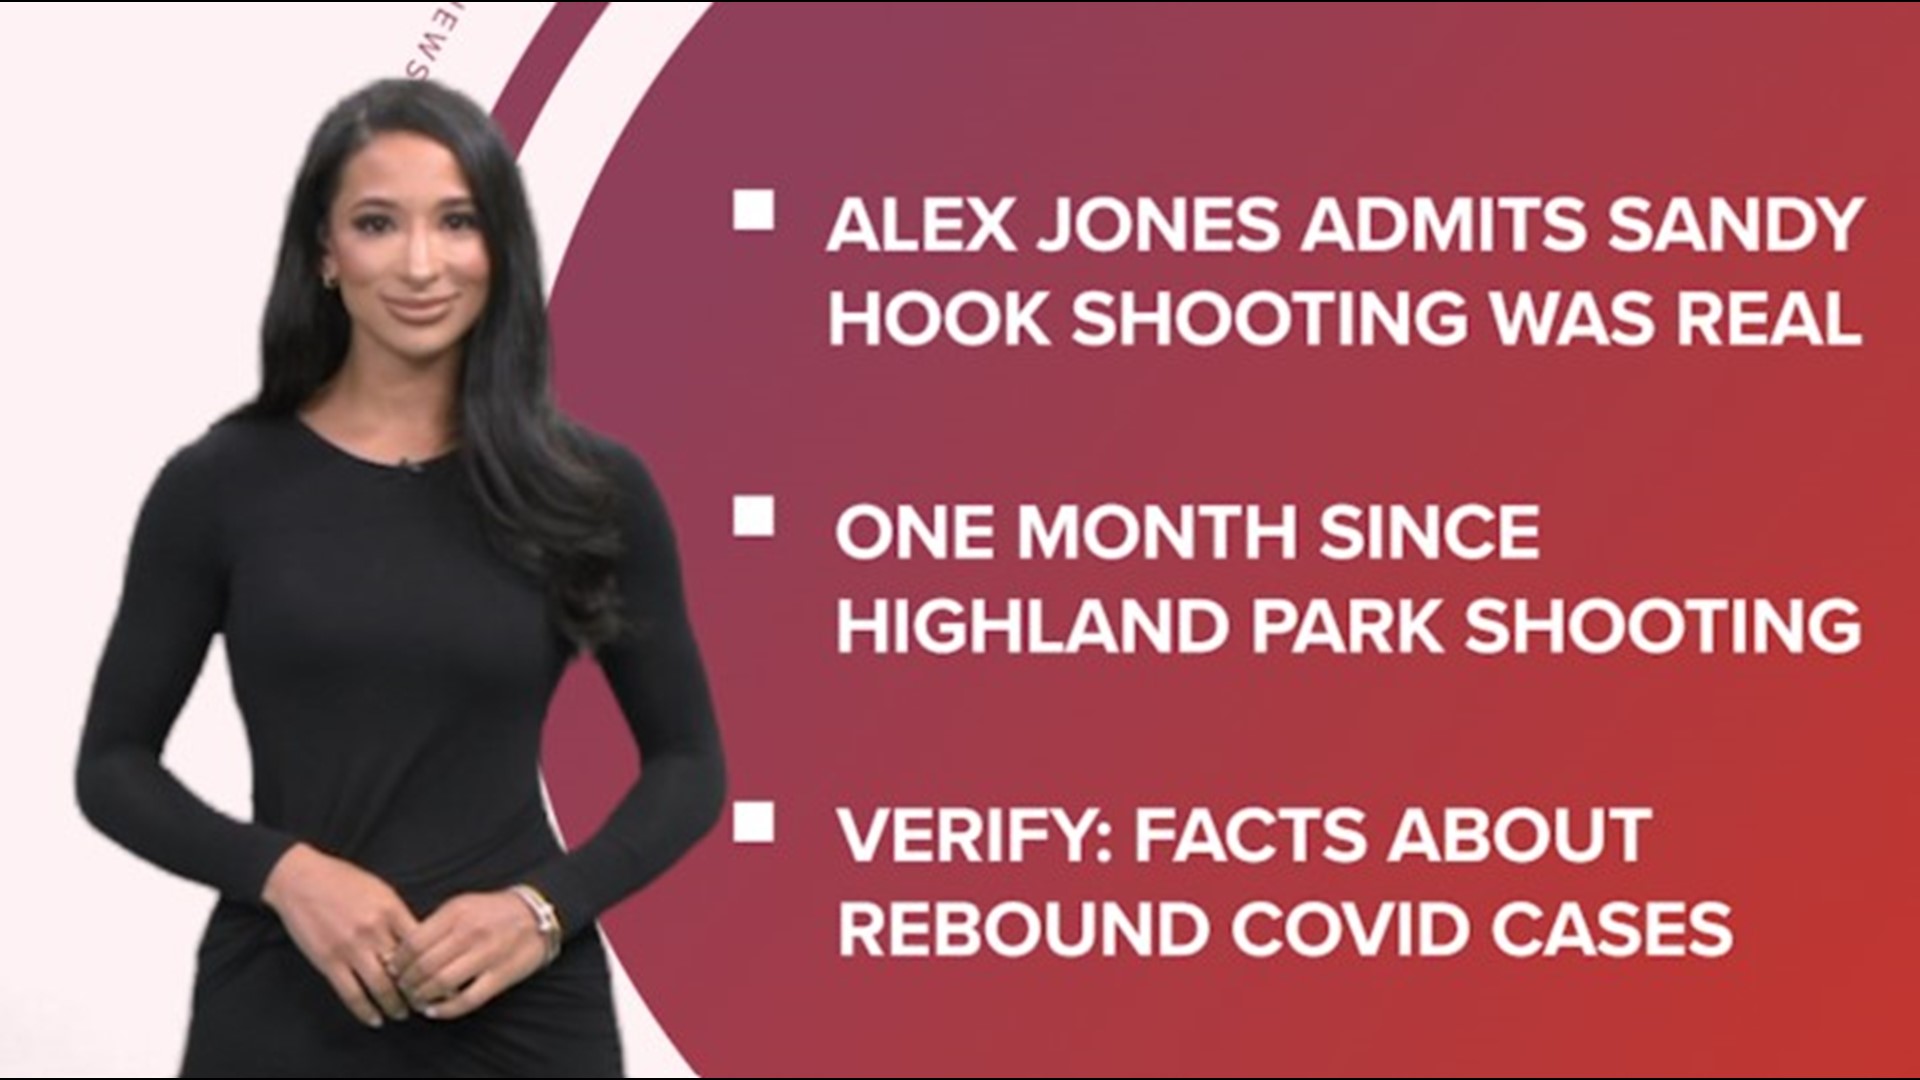 A look at what is happening in the news from Alex Jones admitting the Sandy Hook shooting was real to monkeypox in schools and the NFL pre-season kicking off.